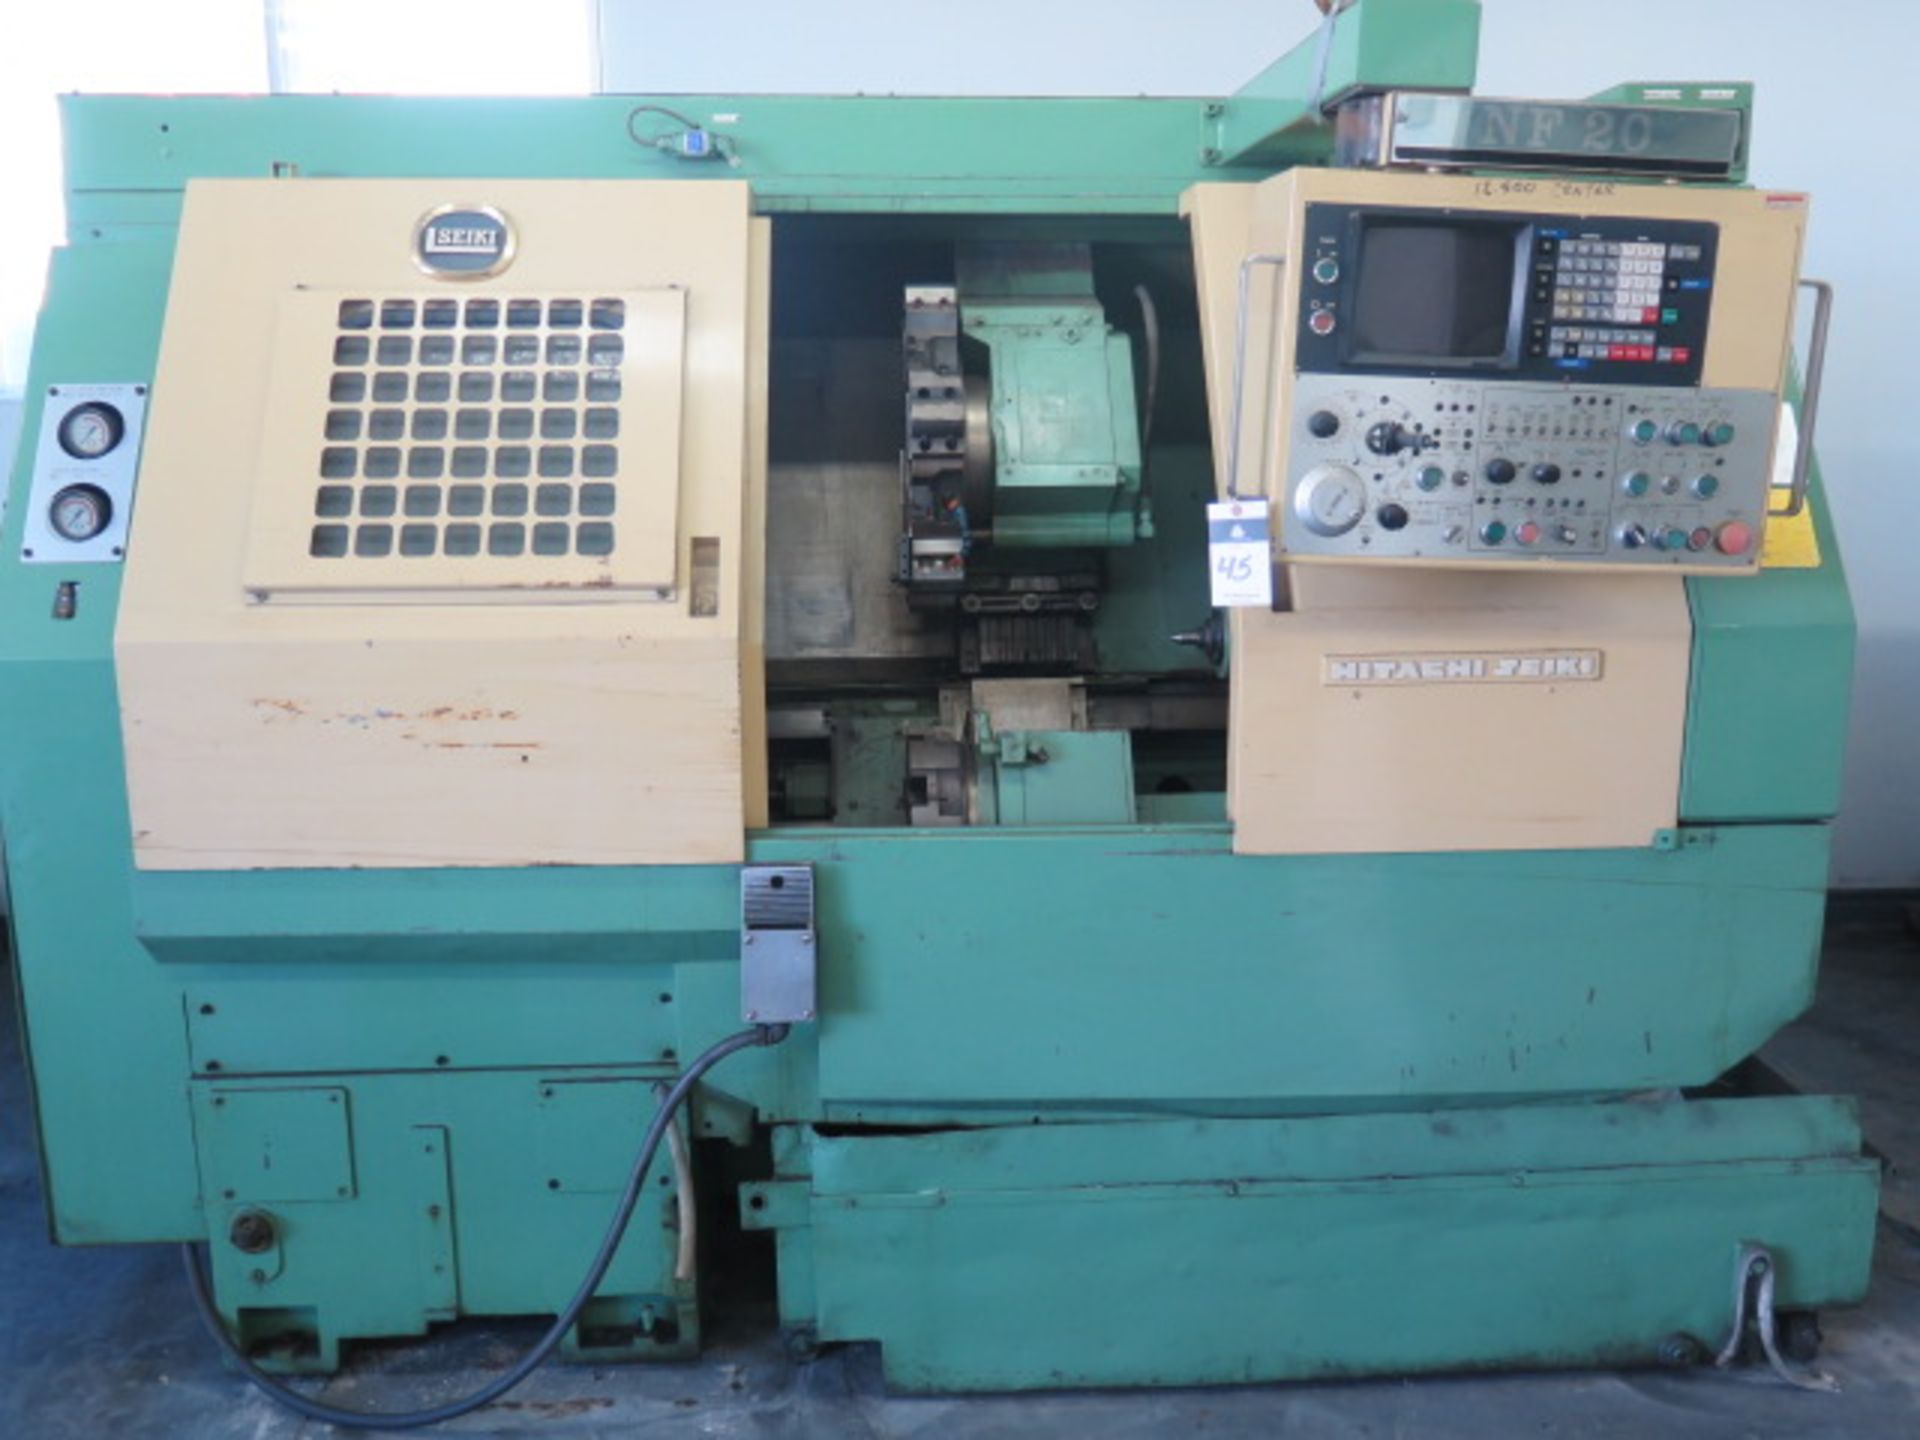 Hitachi Seiki NF-20 Twin Turret CNC Turning Center s/n NF-20026 w/ Fanuc Controls, 12-Station - Image 2 of 13